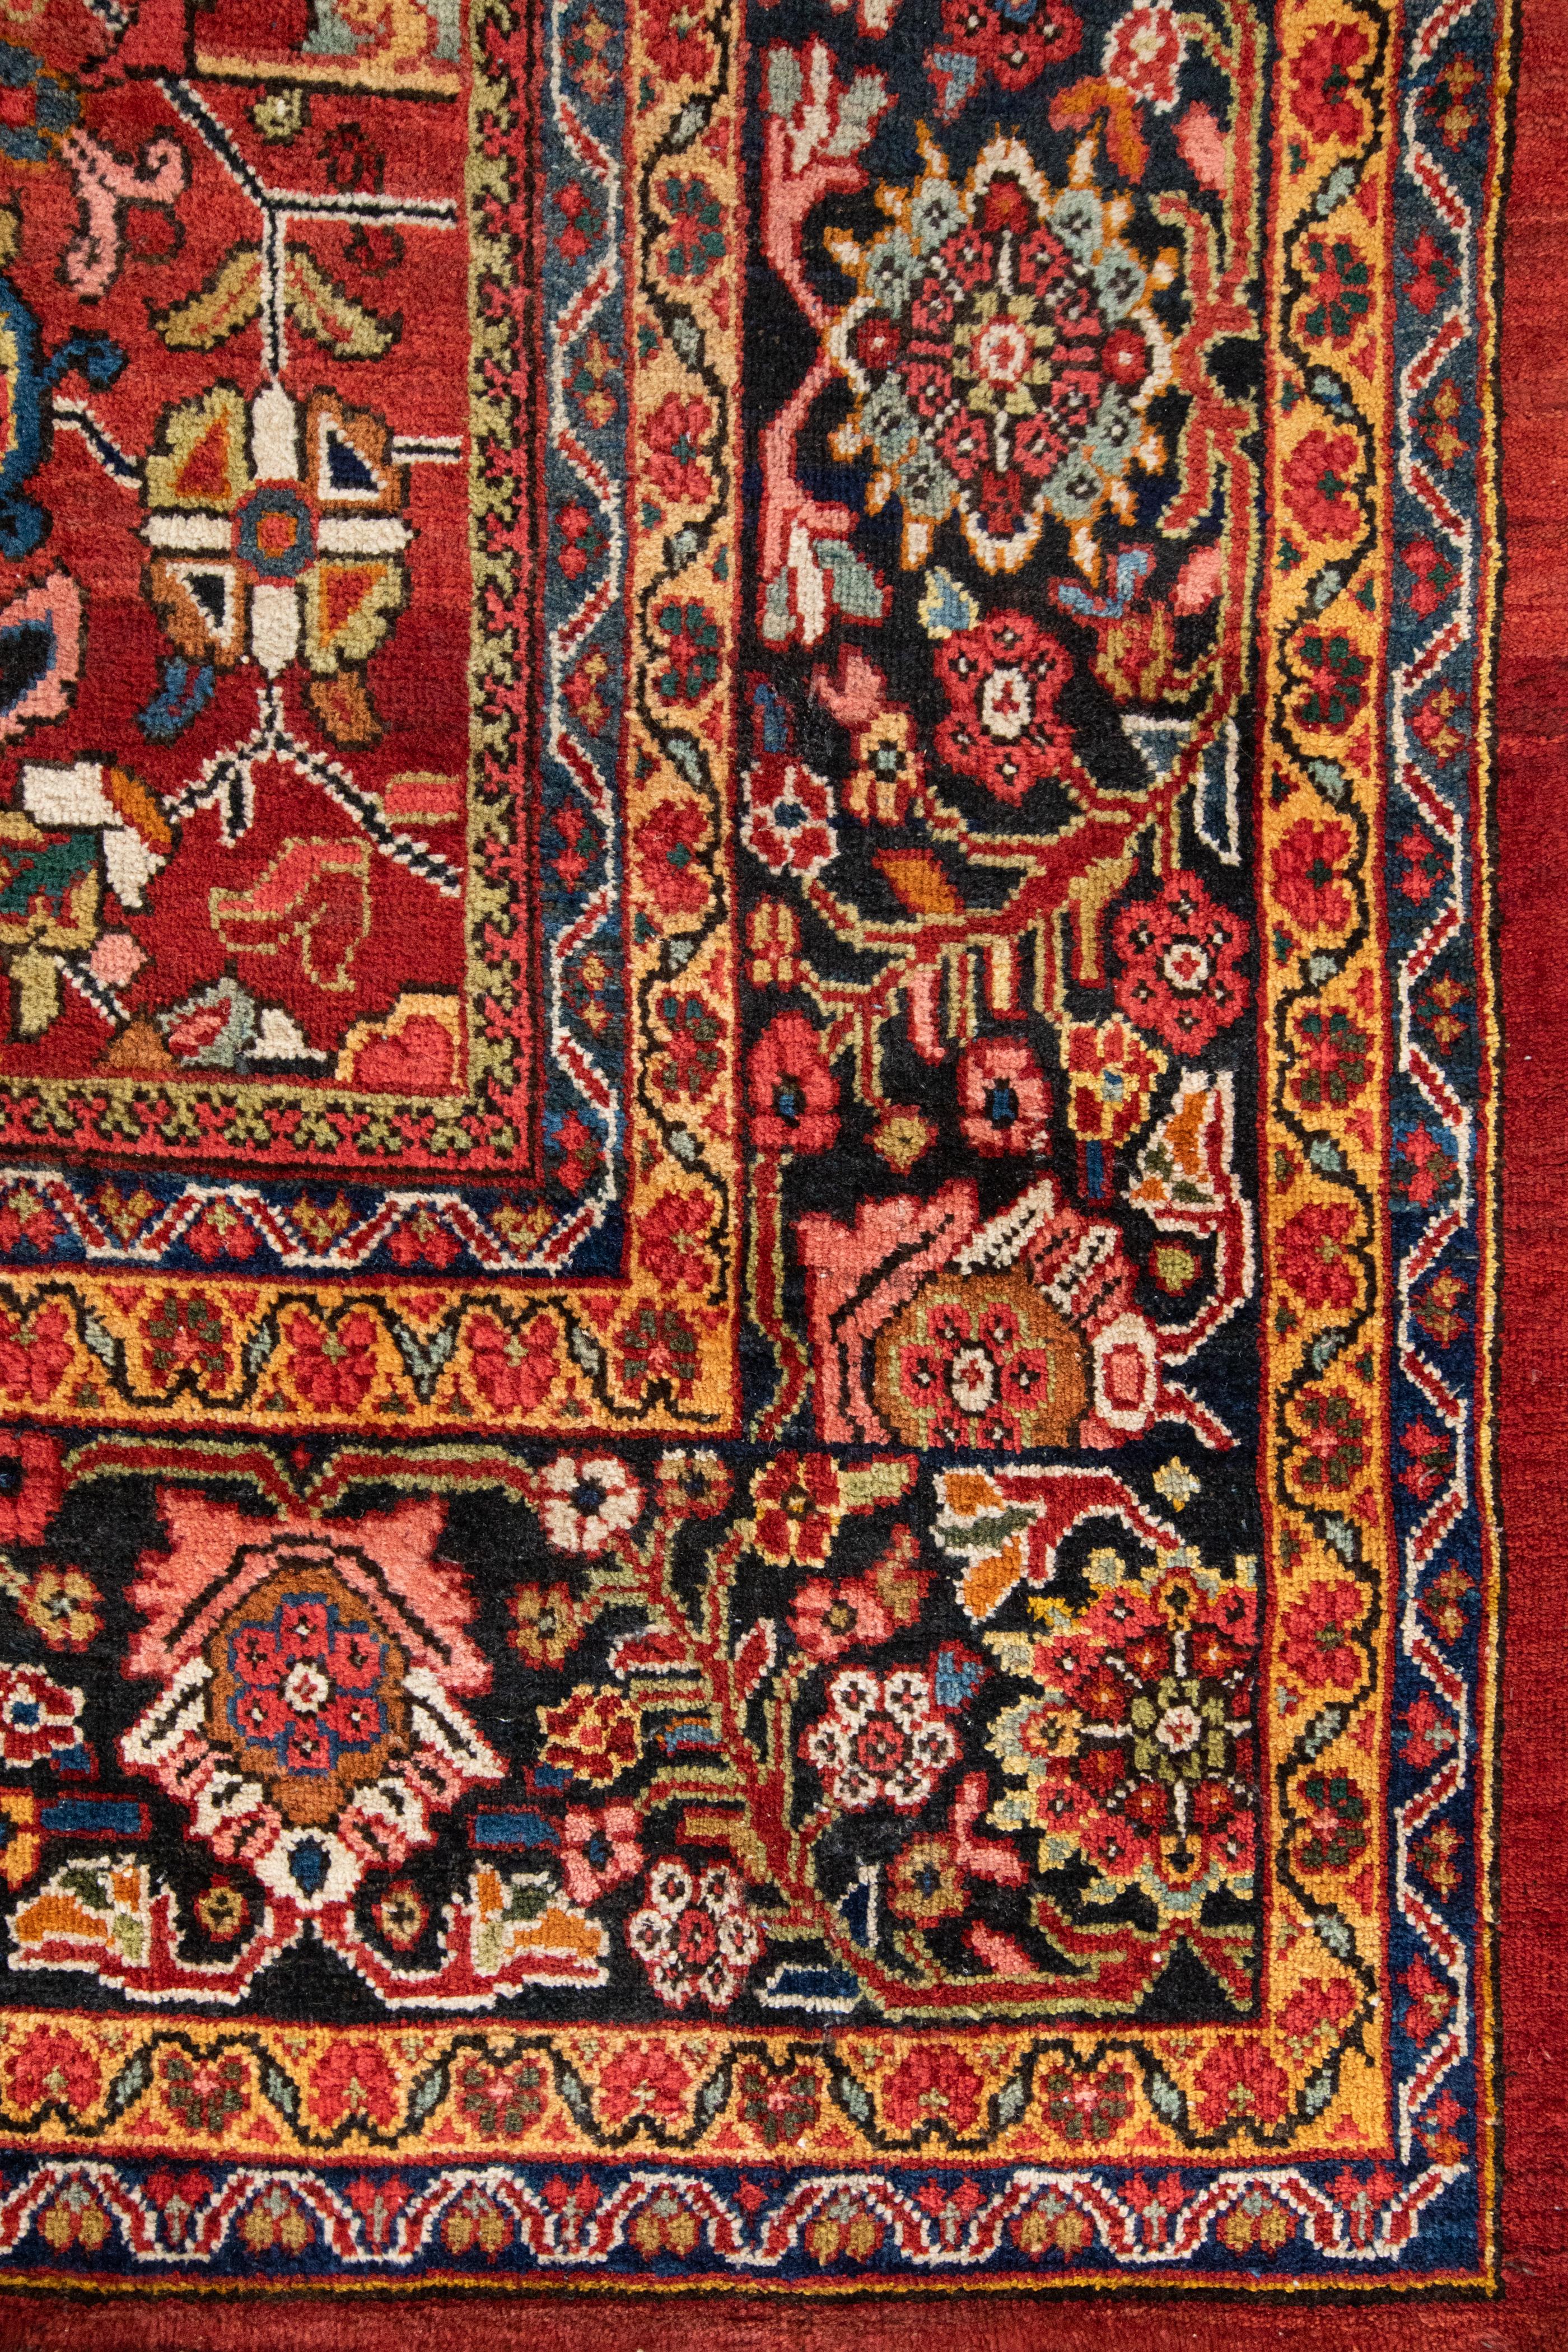 Persian Mahal Ziegler carpets have made quite a name for themselves among the weaving culture since the 19th century. The sophisticated and quirky design of these beauties is what separates them from the rest of the carpets. They’re highly